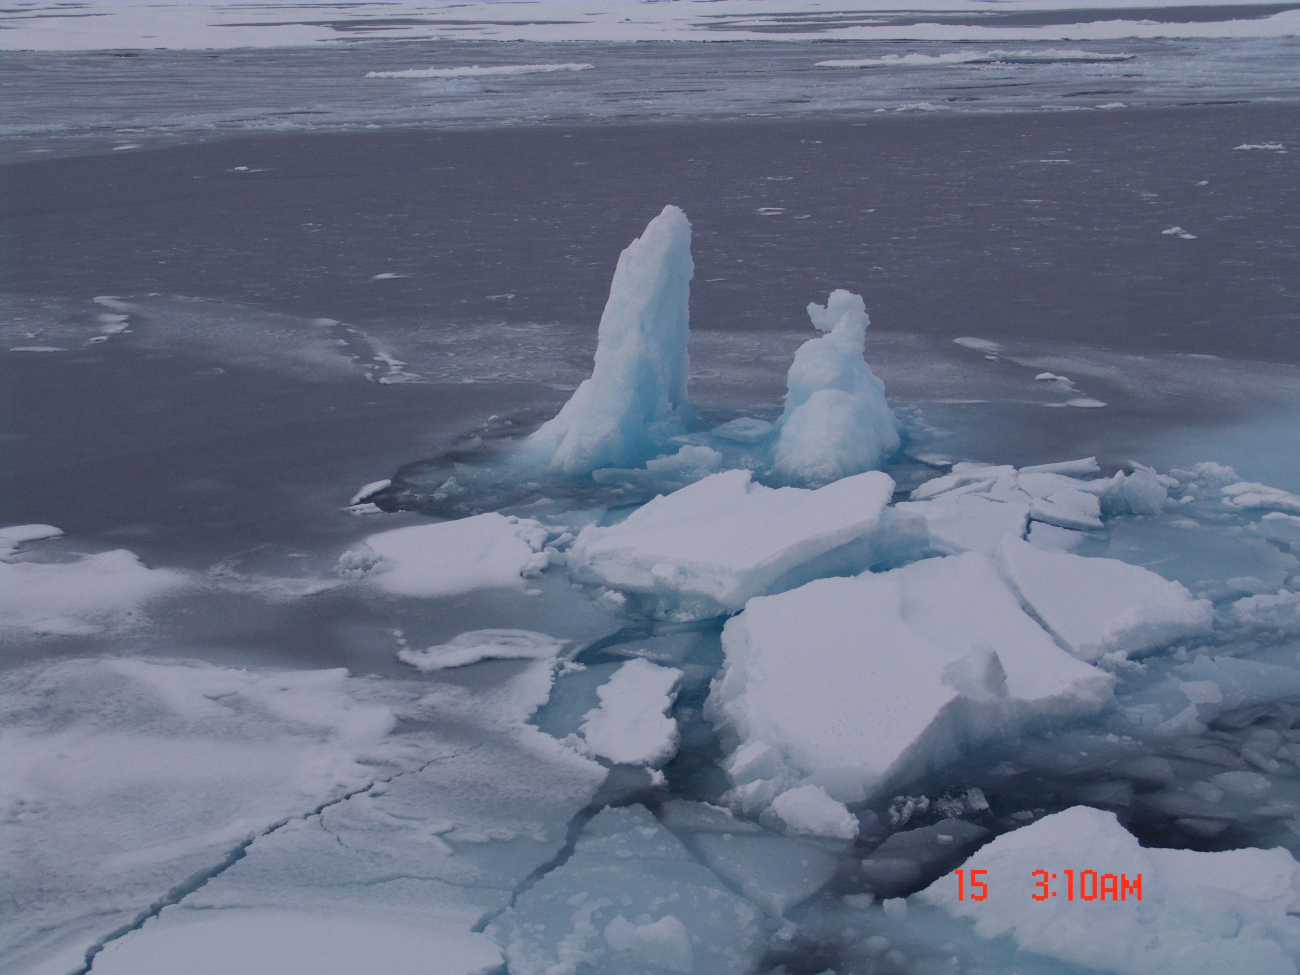 Large blocks of ice frozen in place while perpendicular to water surface